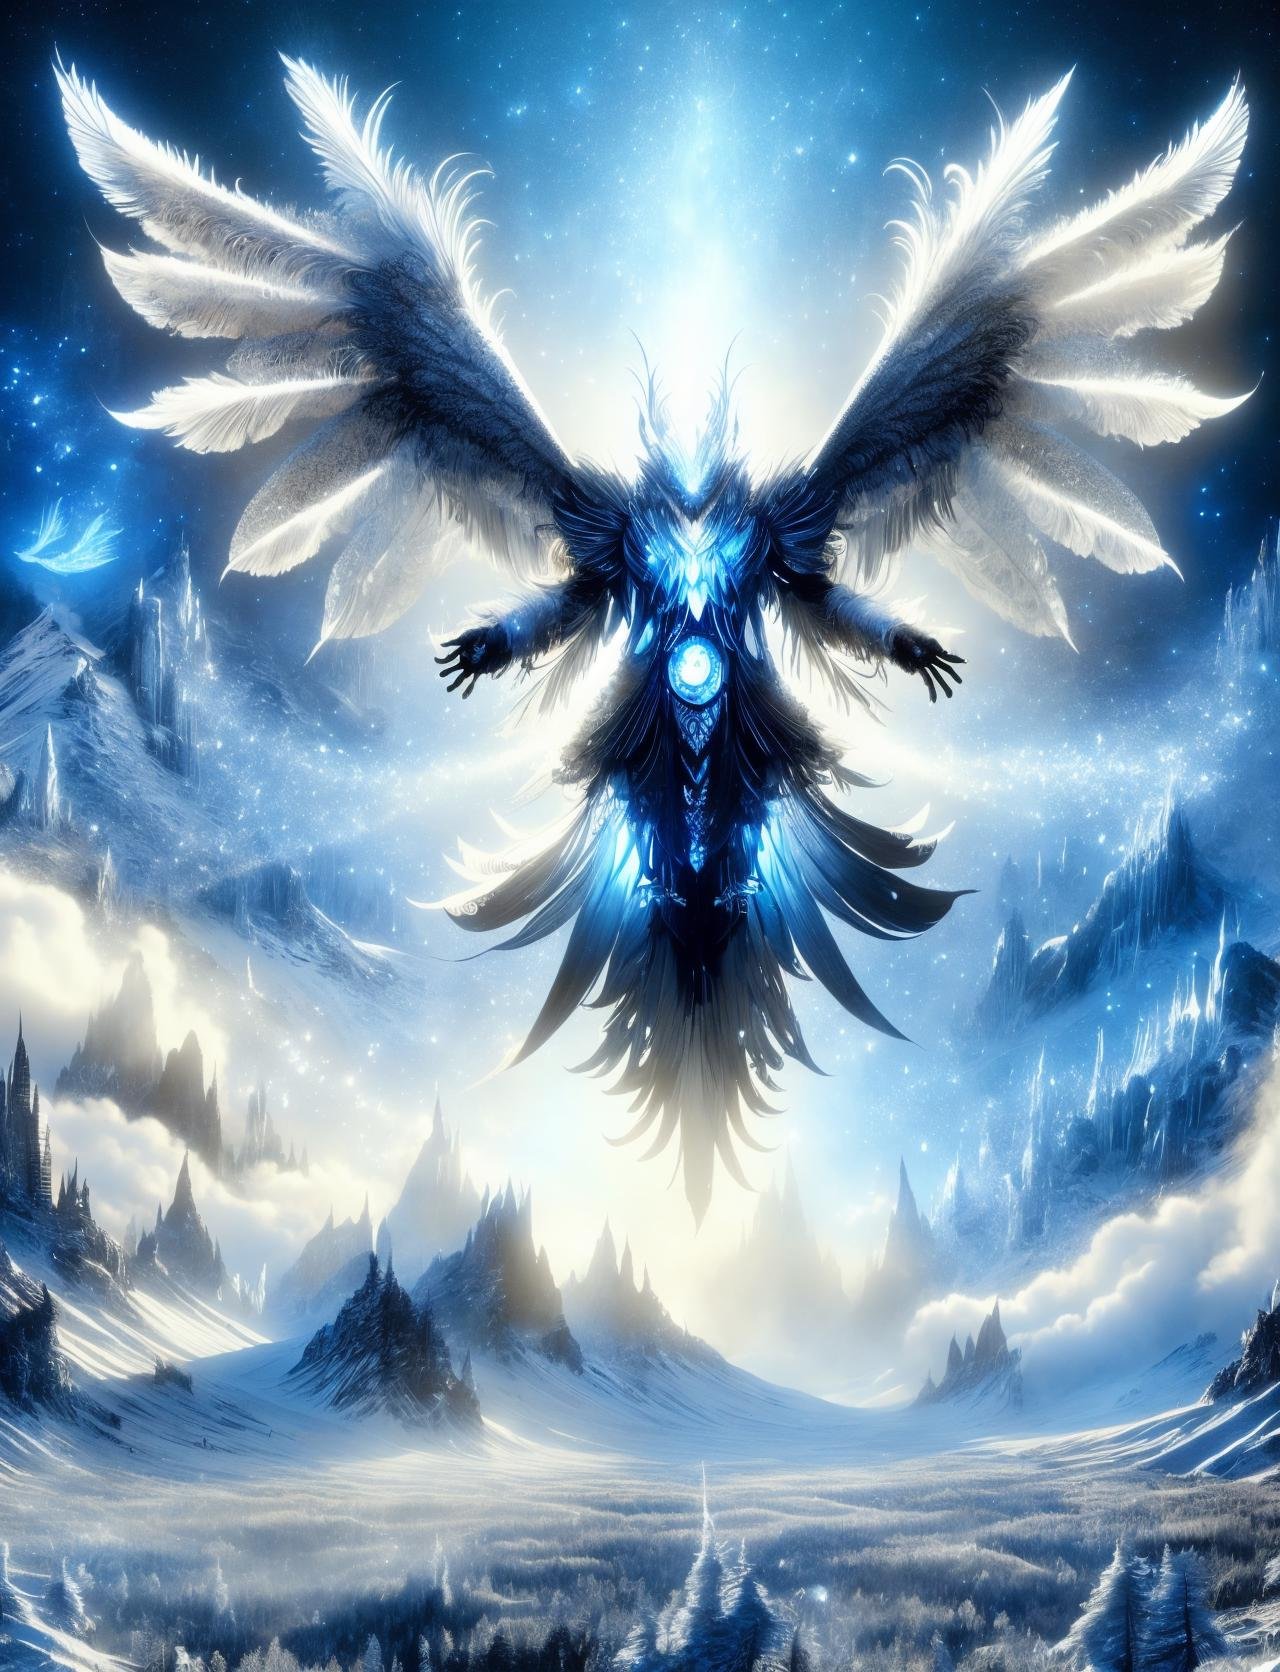 digital art, semi realistic hyper detailed masterpiece, dynamic, awesome quality,DonMSn0wM4g1c, mothman, humanoid elemental being, delicate and ethereal being with gossamer wings, guardians of the air, mountain top,weather, unreal,strange,gears, <lora:DonMSn0wM4g1cv2-000008:1>